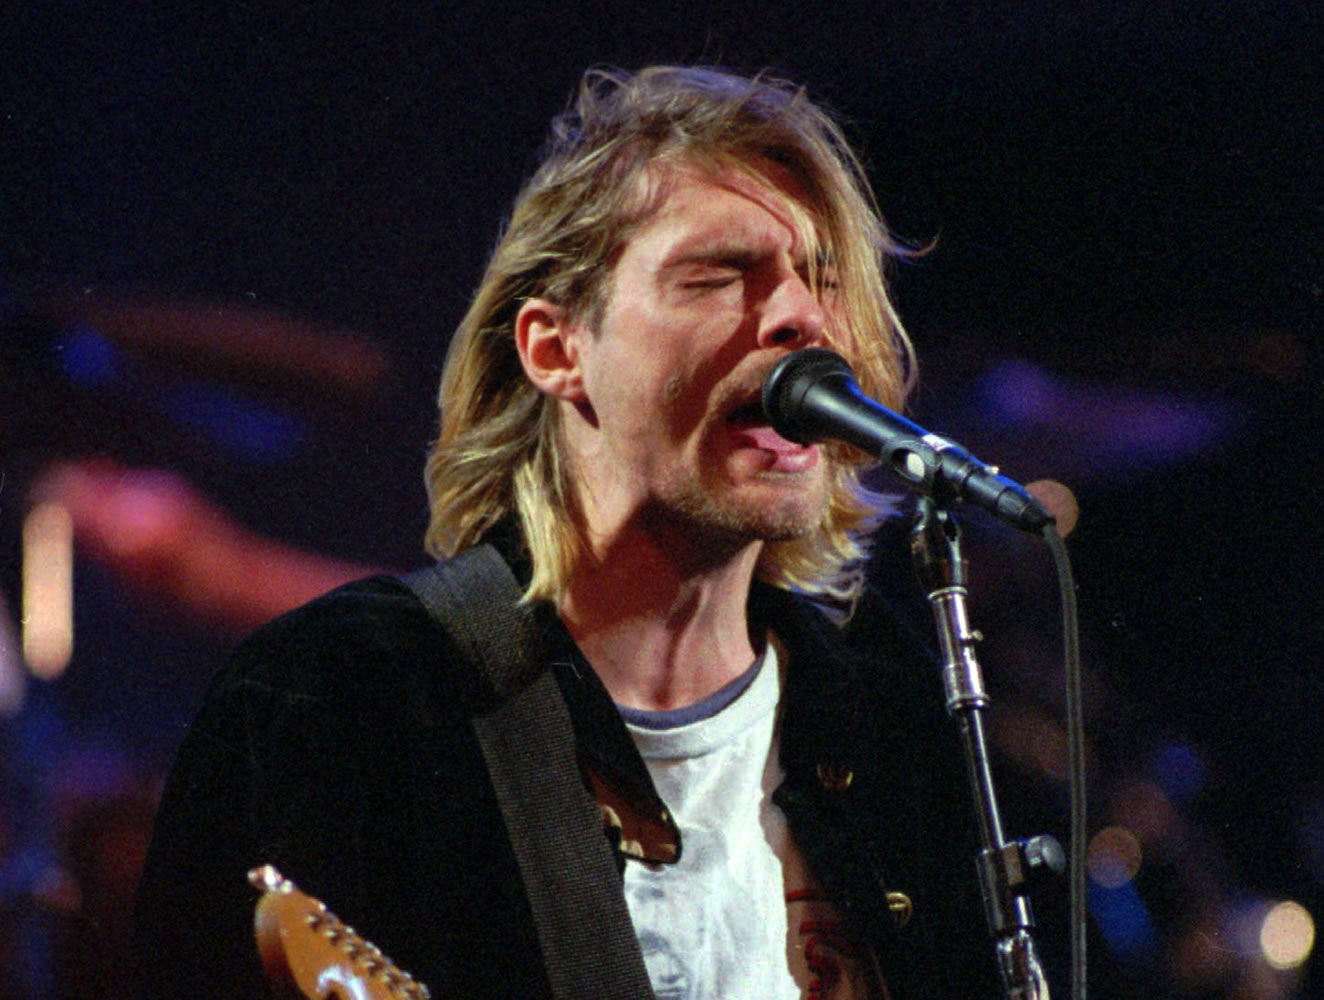 Kurt Cobain of the Seattle band Nirvana performs Dec. 13, 1993 in Seattle, Wash. Nirvana, which changed music and fashion in the 1990s with the punk rock-inspired grunge sound, is joining the Rock and Roll Hall of Fame in a class with Kiss, Peter Gabriel and Hall &amp; Oates.